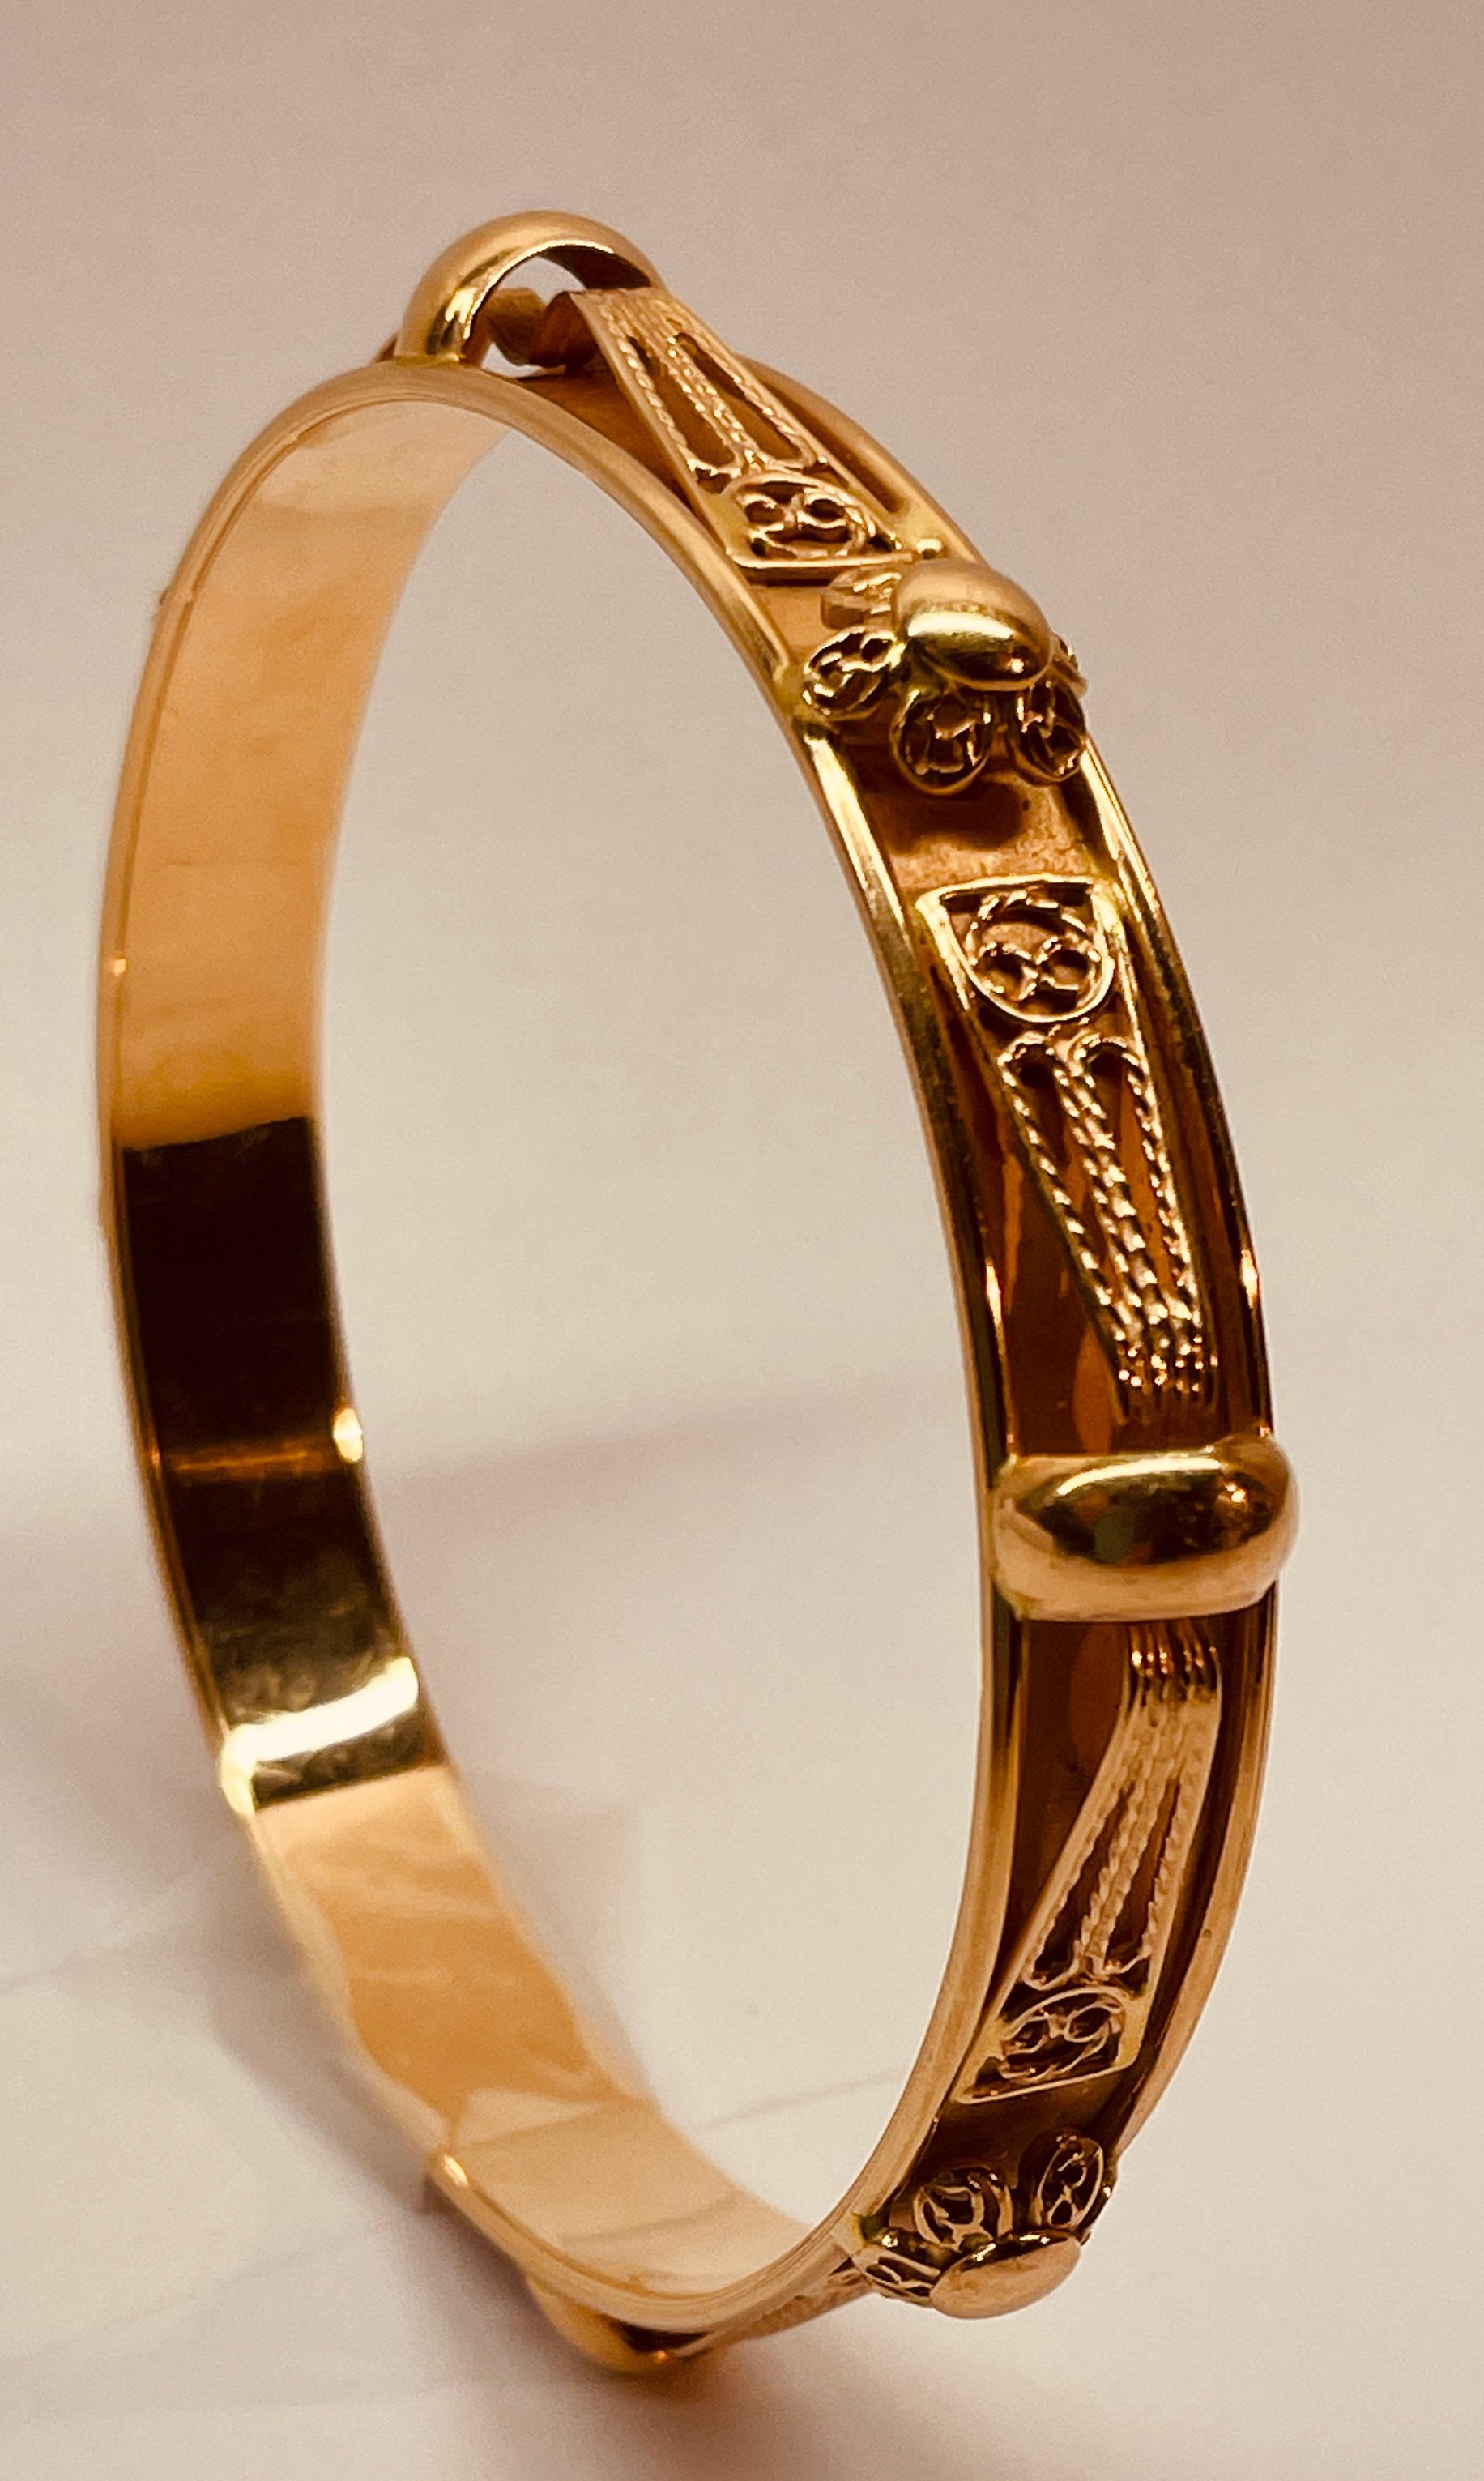 Victorian Gold French Oriental Bangle Bracelets 18 Karat set of two.
An exceptional example of antique finery Victorian style jewellery set well done in Oriental style design. The bracelets have a circumference of just over inches. It is just over 1